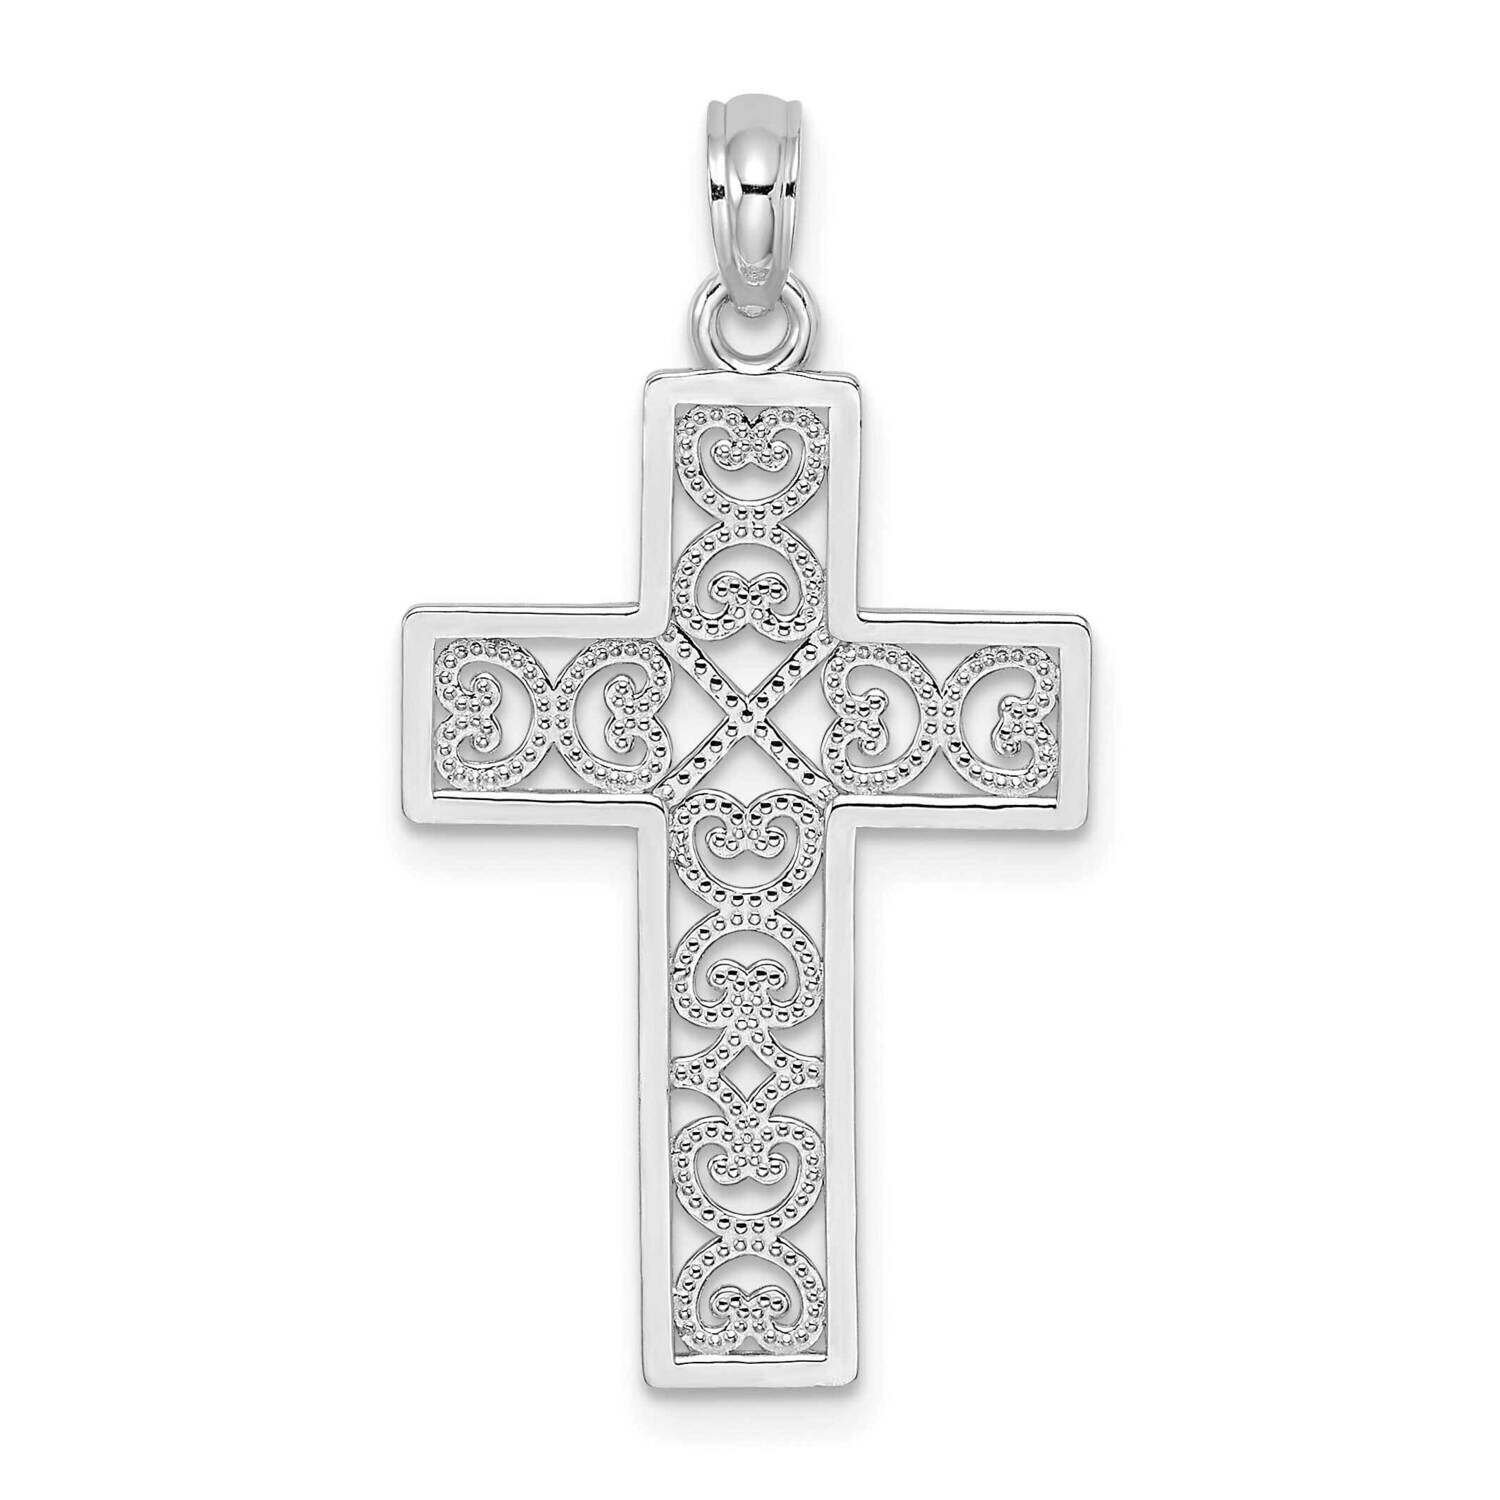 Sqaure Cross with Heart Design Charm 14k White Gold Polished K8511W